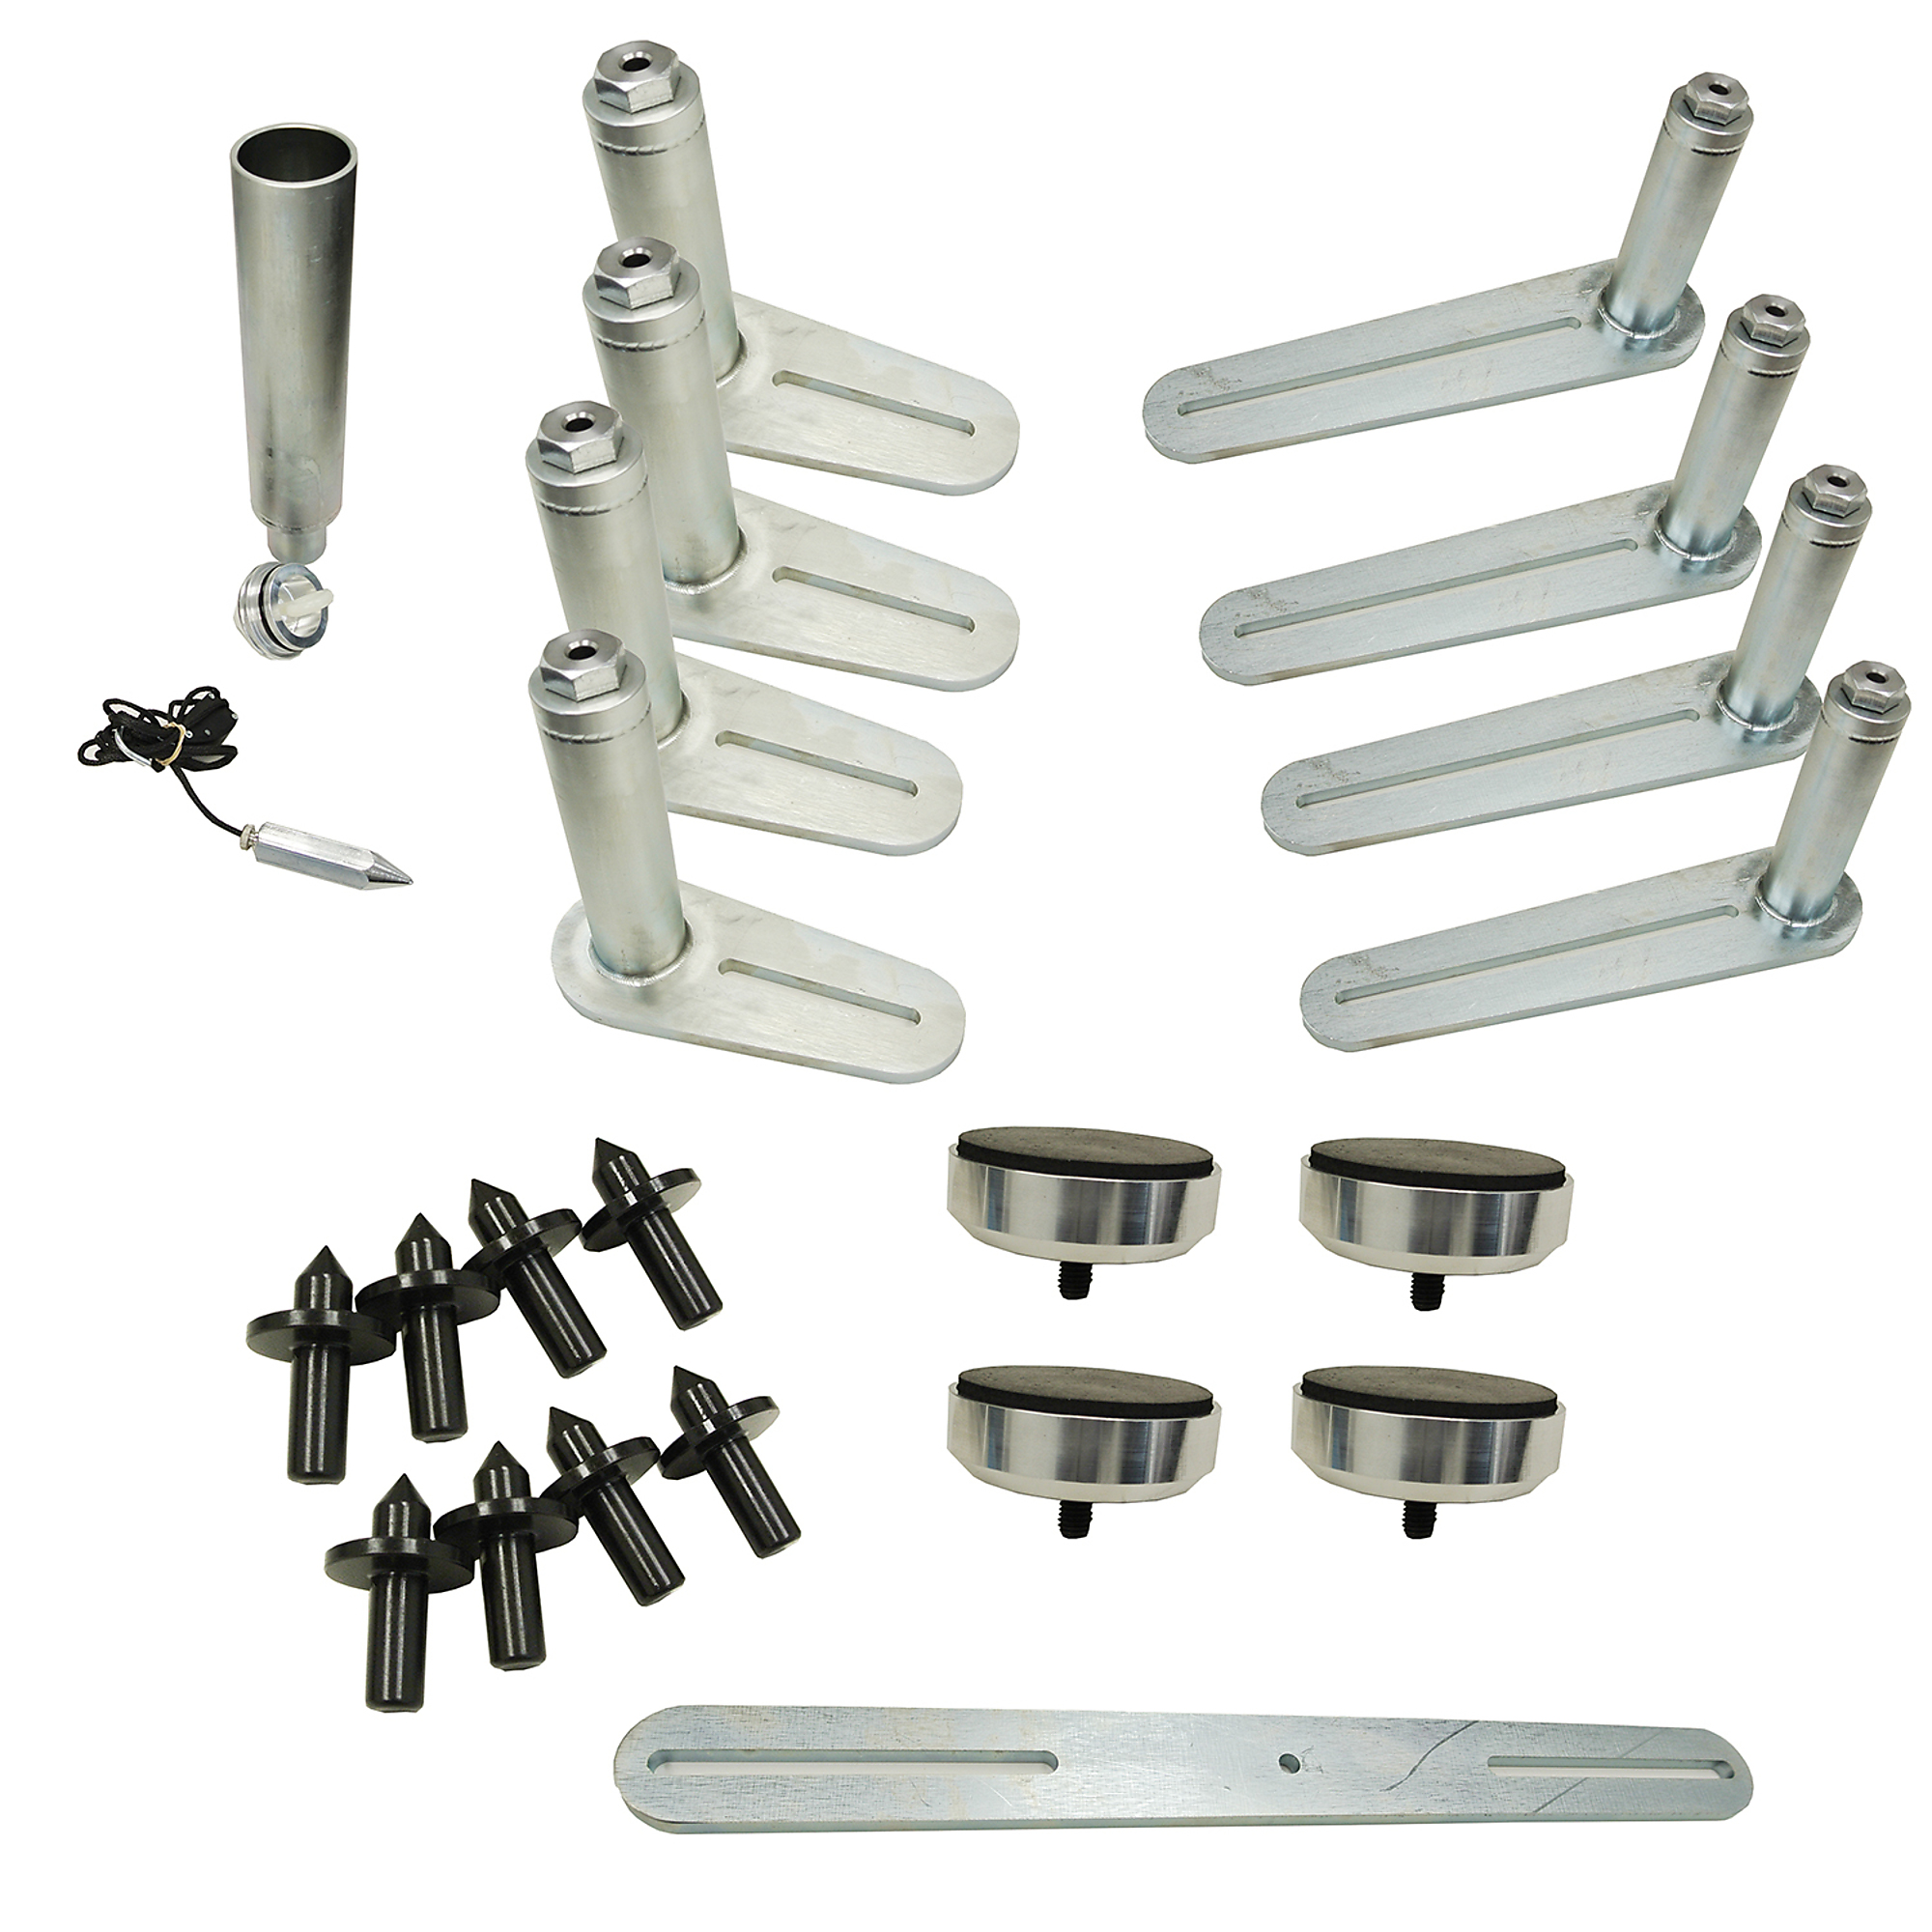 Stan Design, Engine transmission fixures kit, Capacity 2600 lb, Included (qty.) 1 Model 2650